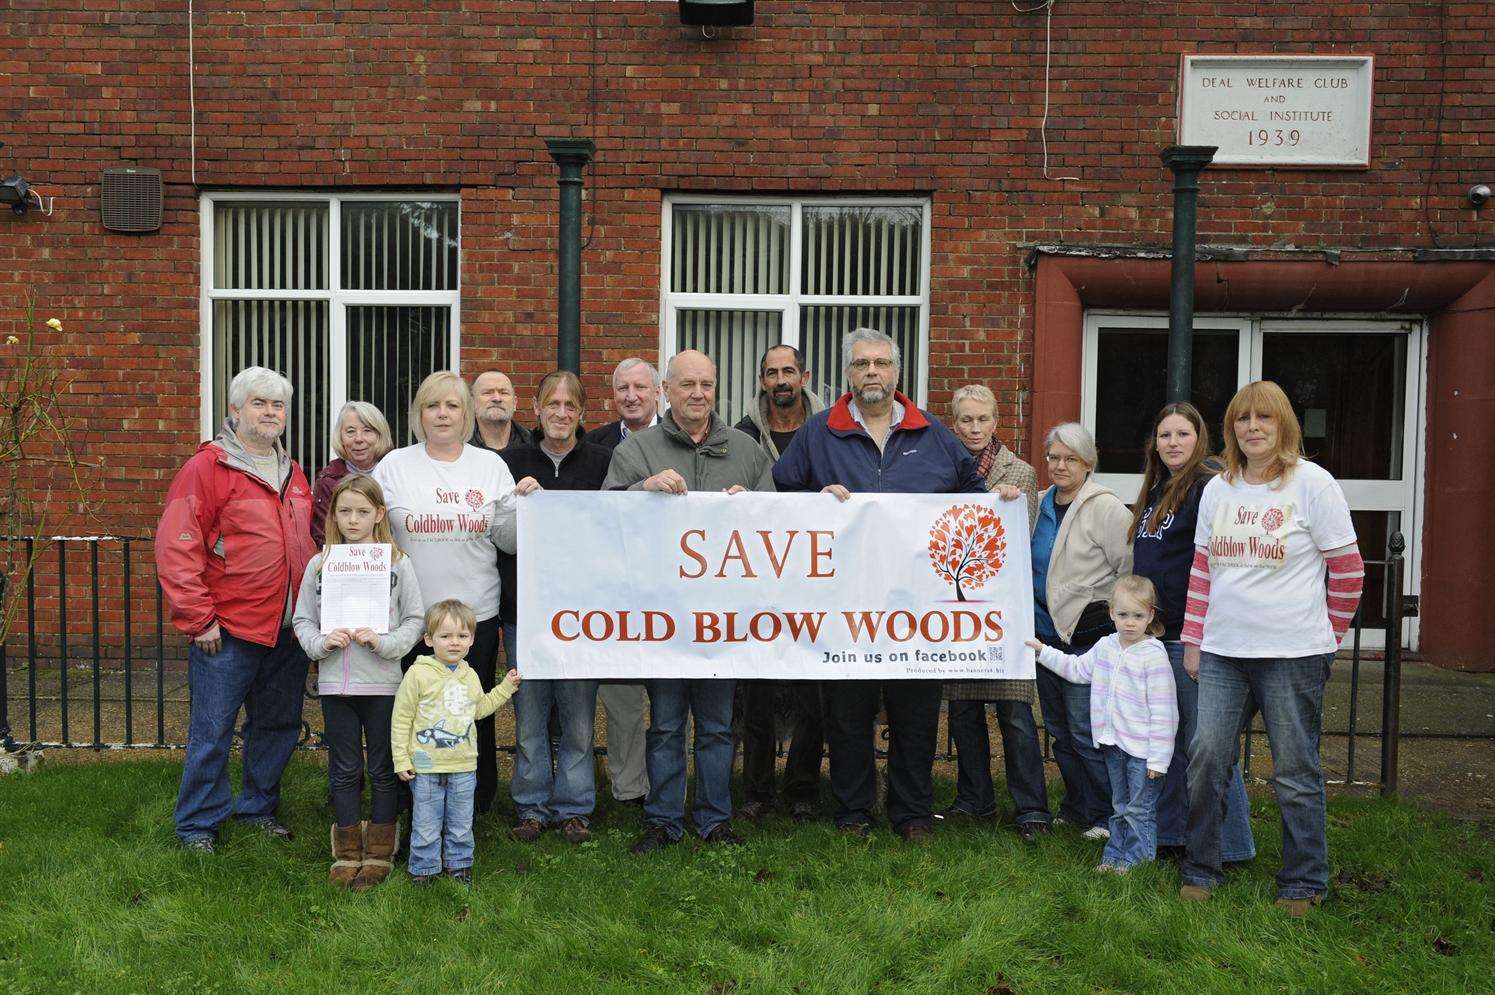 Campaigners to keep Coldblow woods open met at the Deal Welfare Club